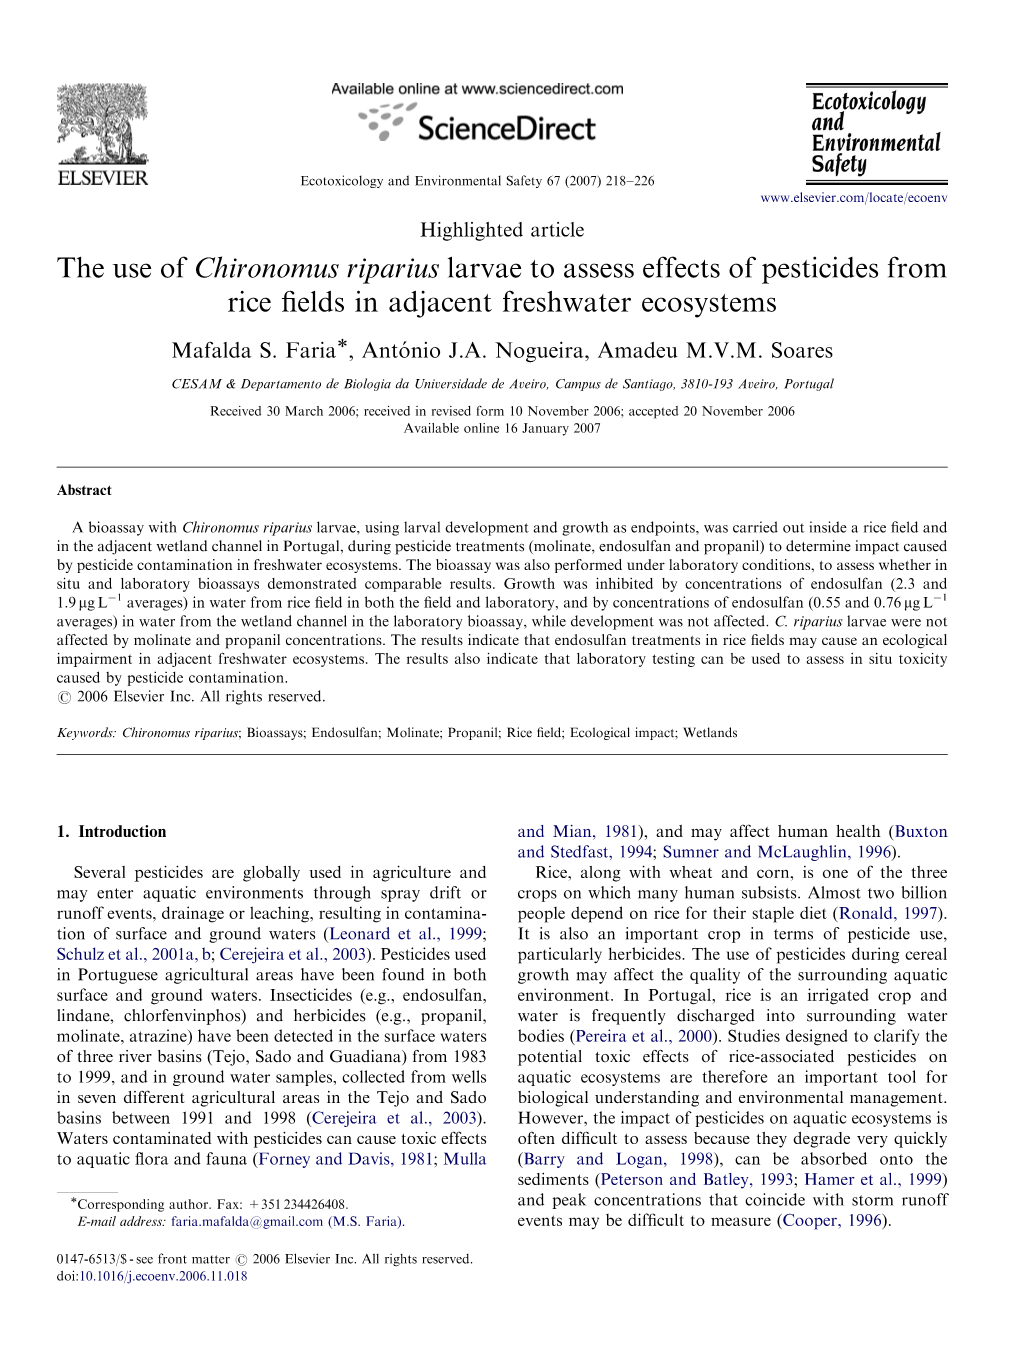 The Use of Chironomus Riparius Larvae to Assess Effects of Pesticides from Rice Fields in Adjacent Freshwater Ecosystems